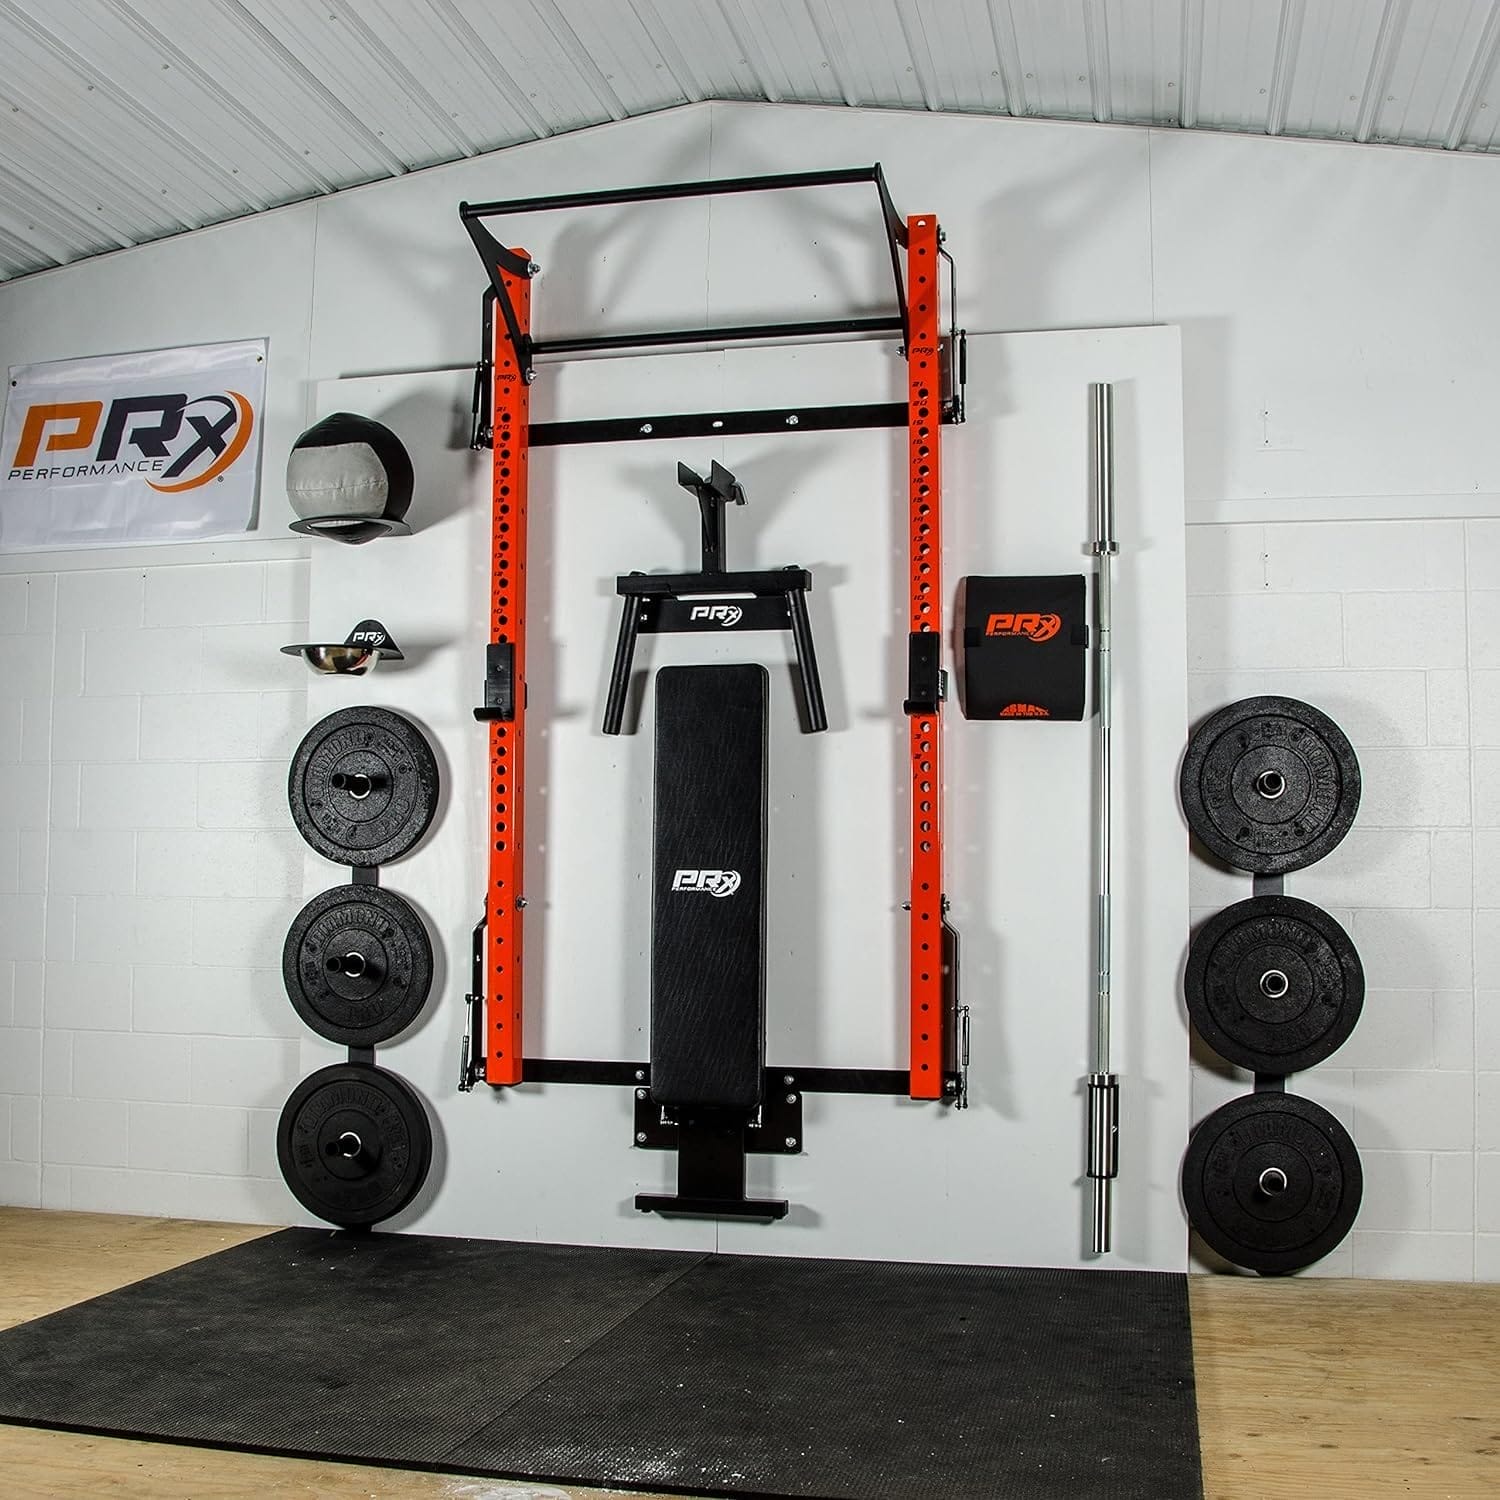 You are currently viewing Comparing 3 Top Fitness Equipment: Power Cage, Wall Mounted Bench, and Adjustable Utility Bench